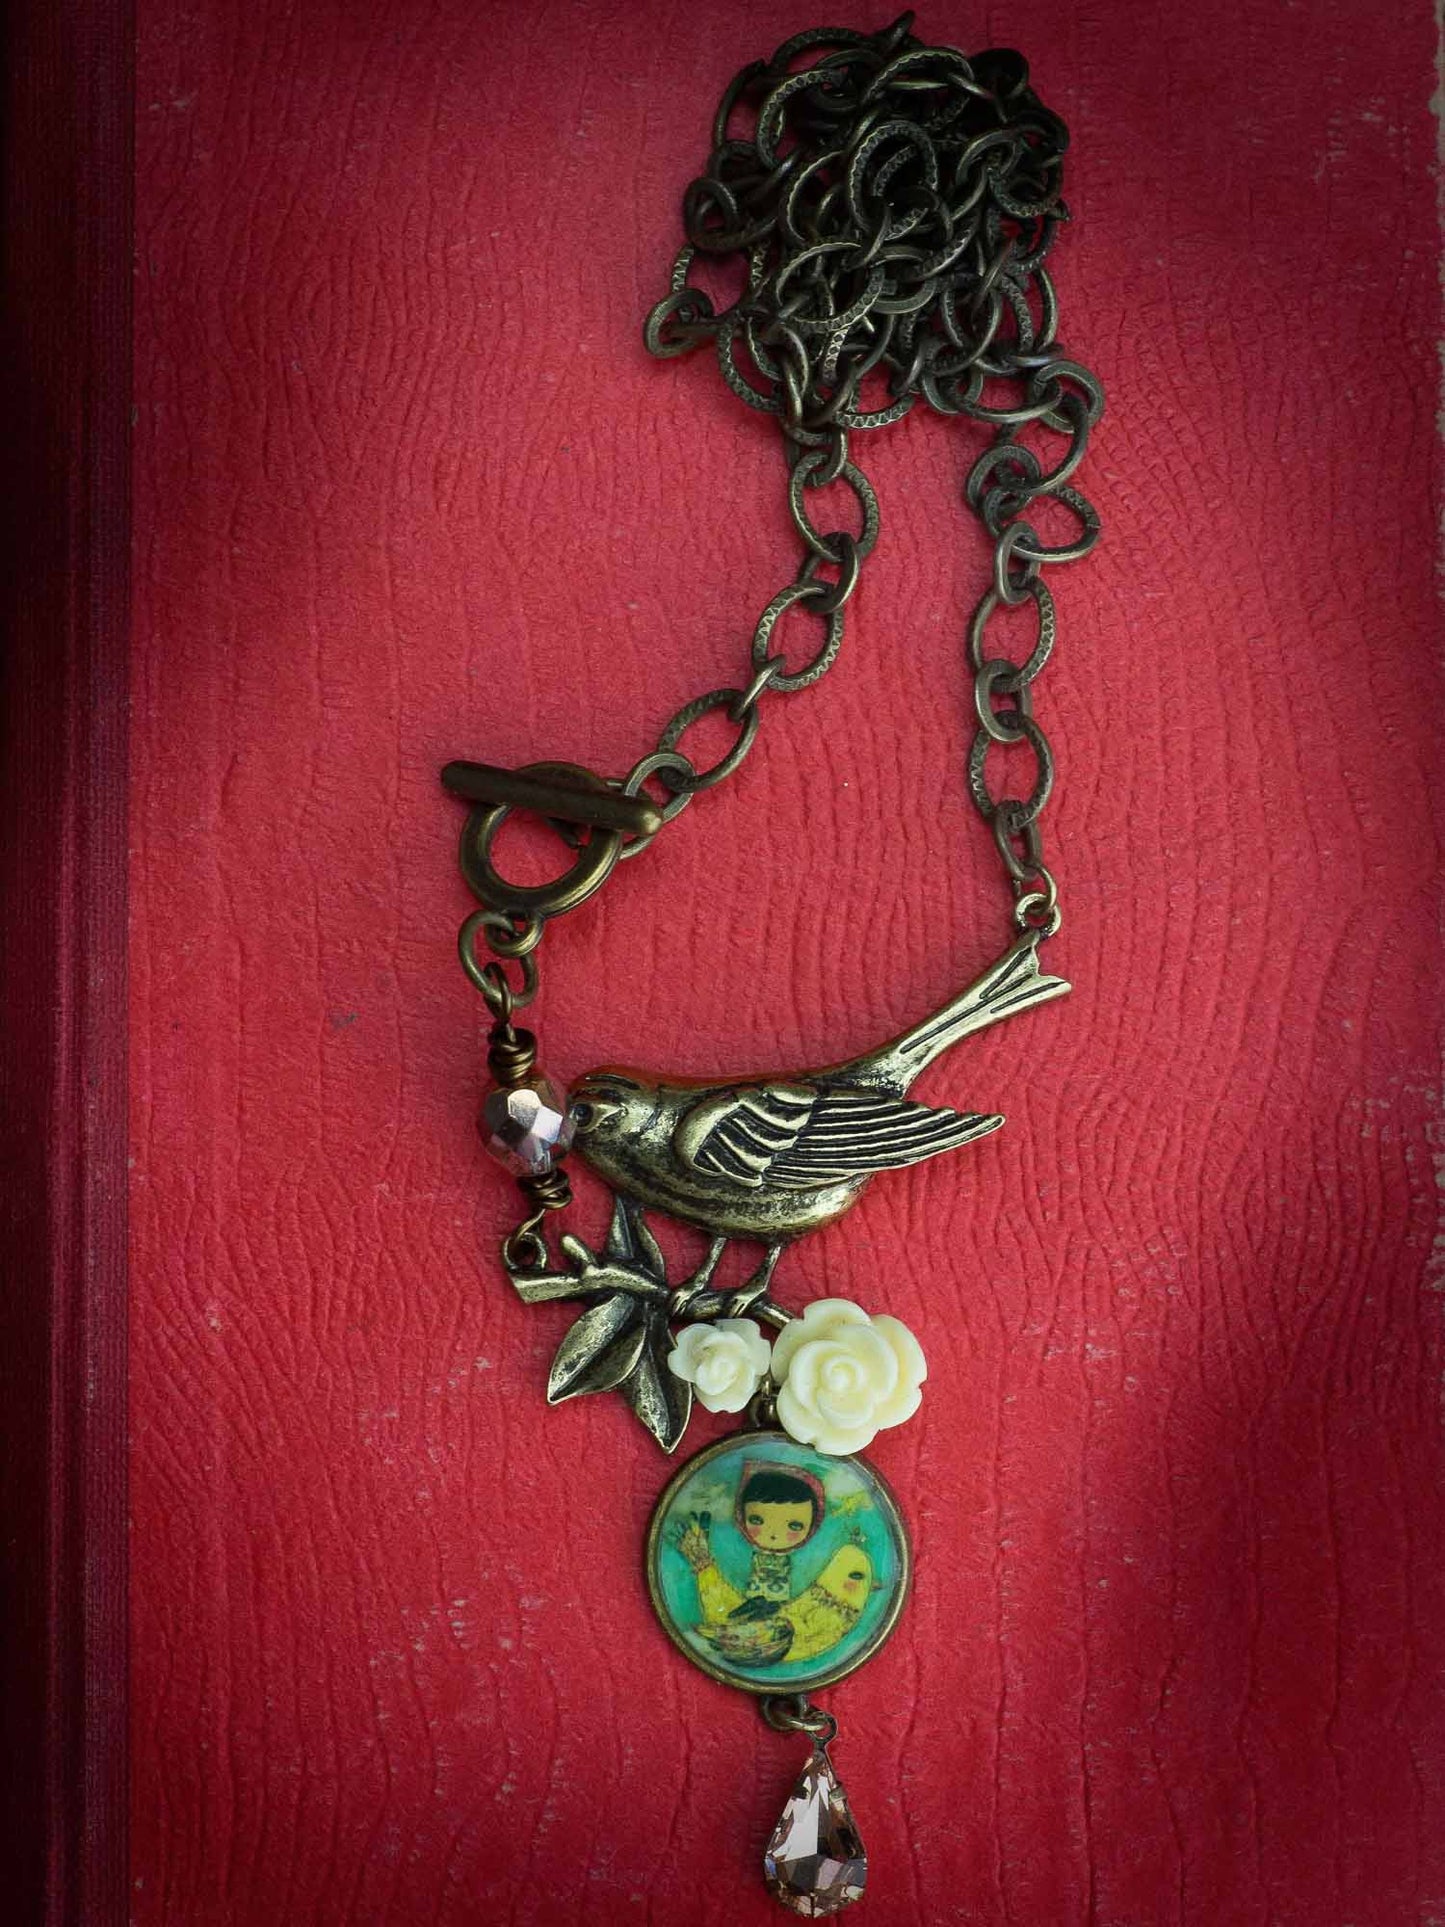 Danita original jewelry necklace wearable art with a metal bird charm and yellow roses